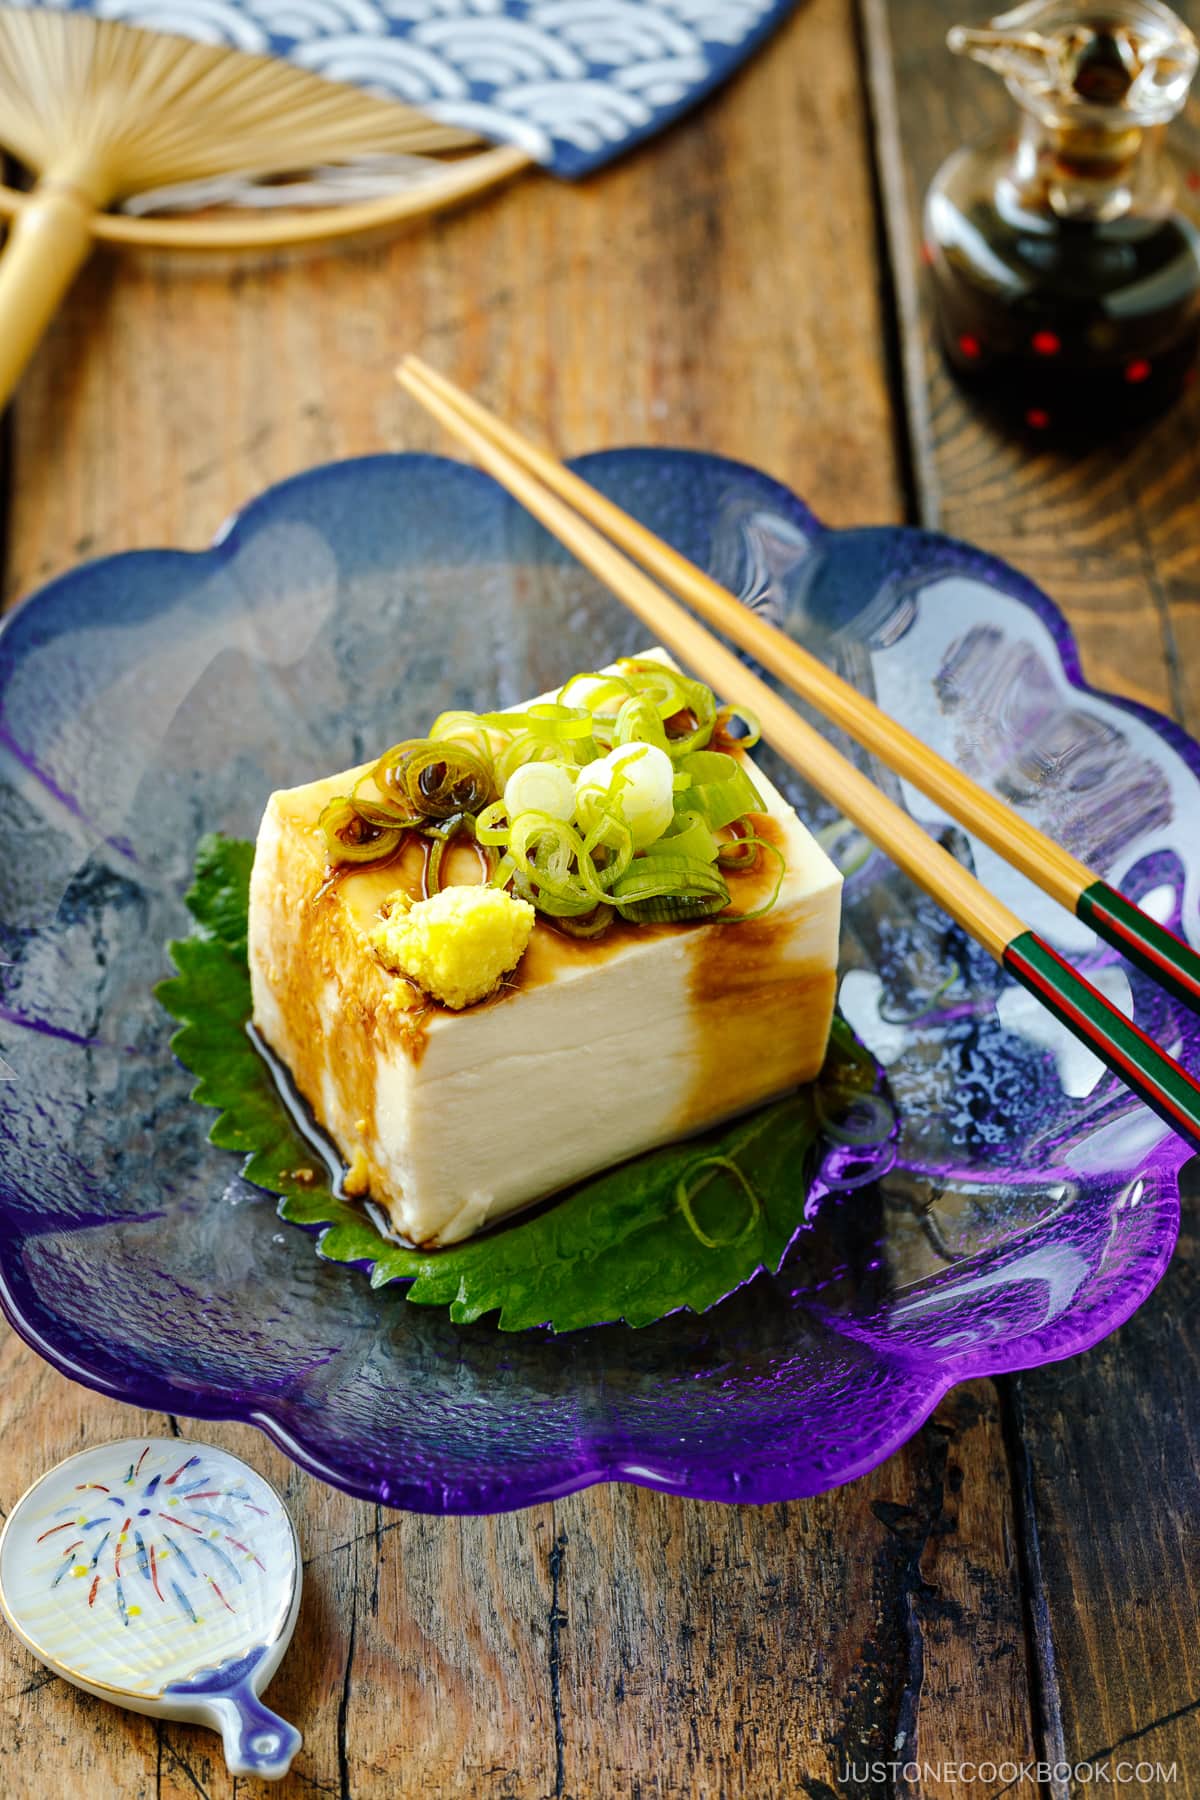 A glassware containing Japanese cold tofu topped with green onion and grated ginger and drizzled with soy sauce.